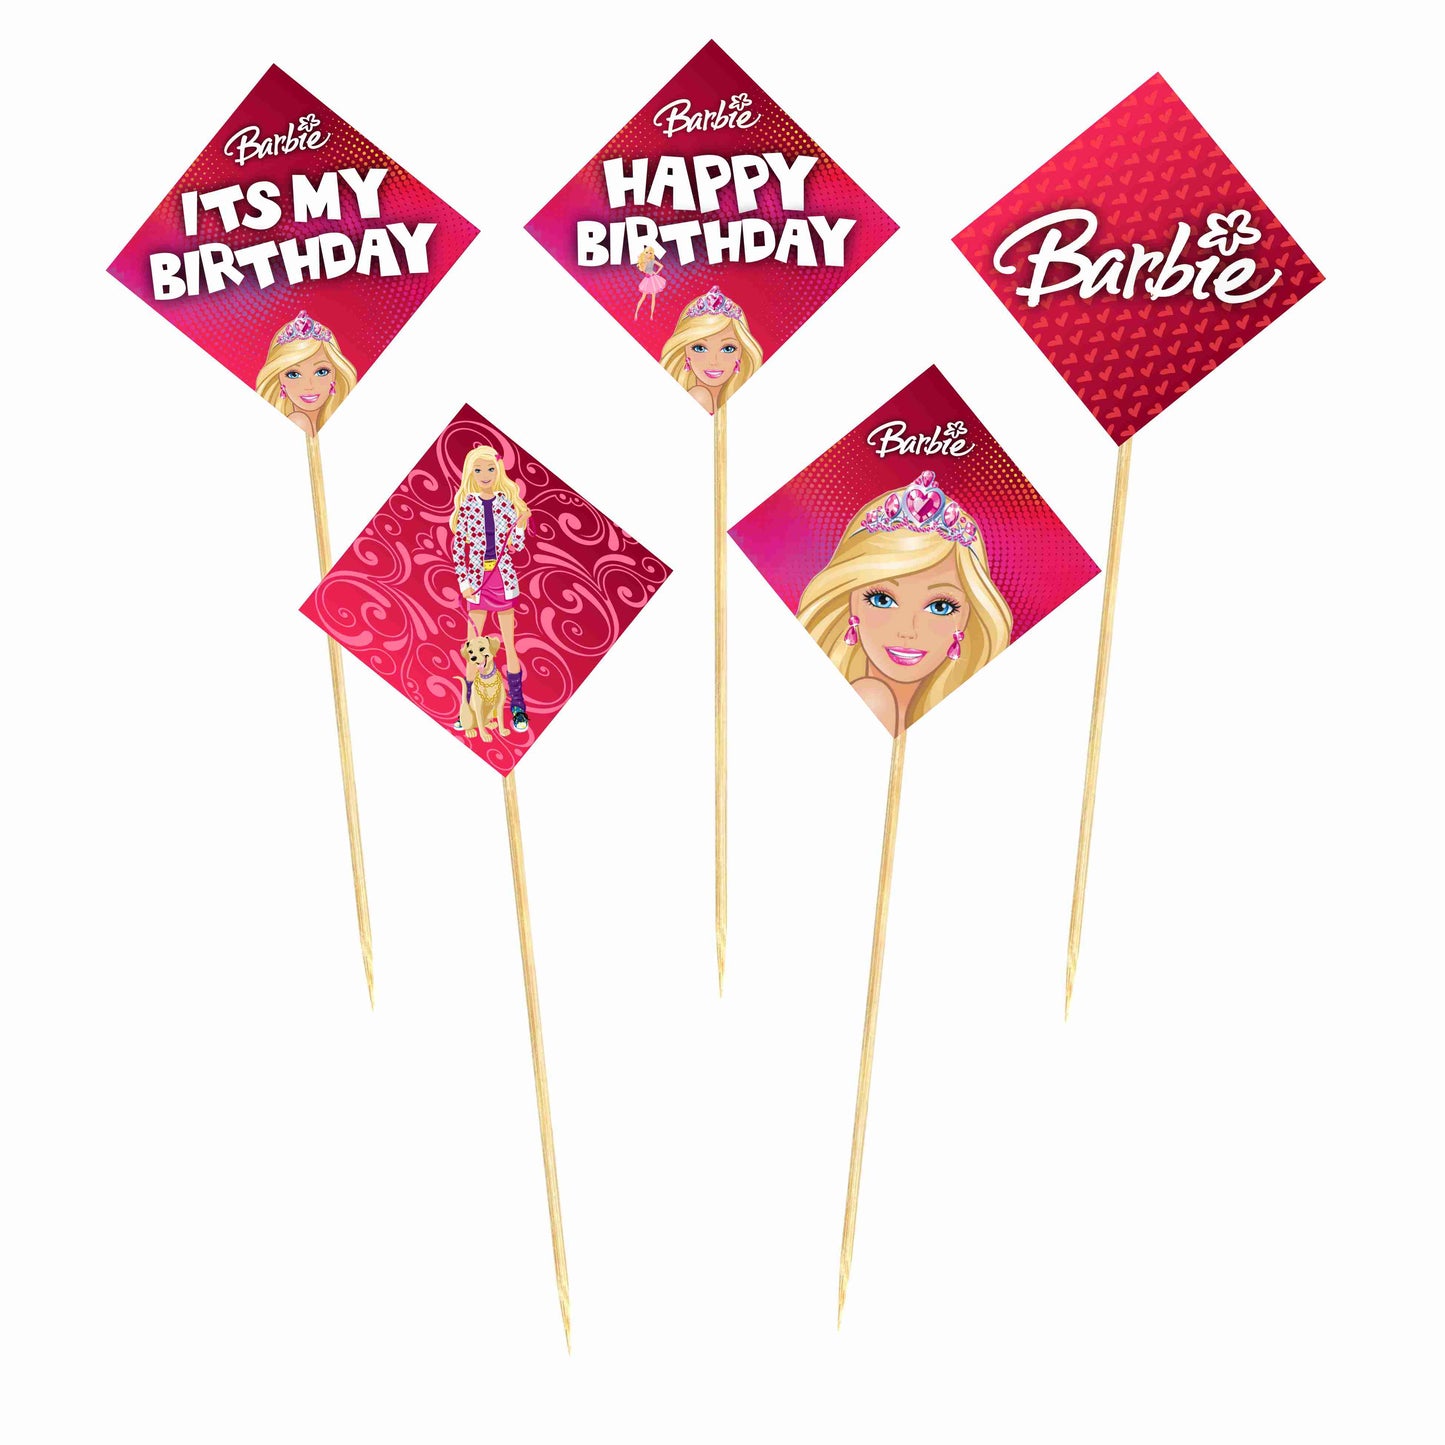 Barbie Theme Cake Topper Pack of 10 Nos for Birthday Cake Decoration Theme Party Item For Boys Girls Adults Birthday Theme Decor